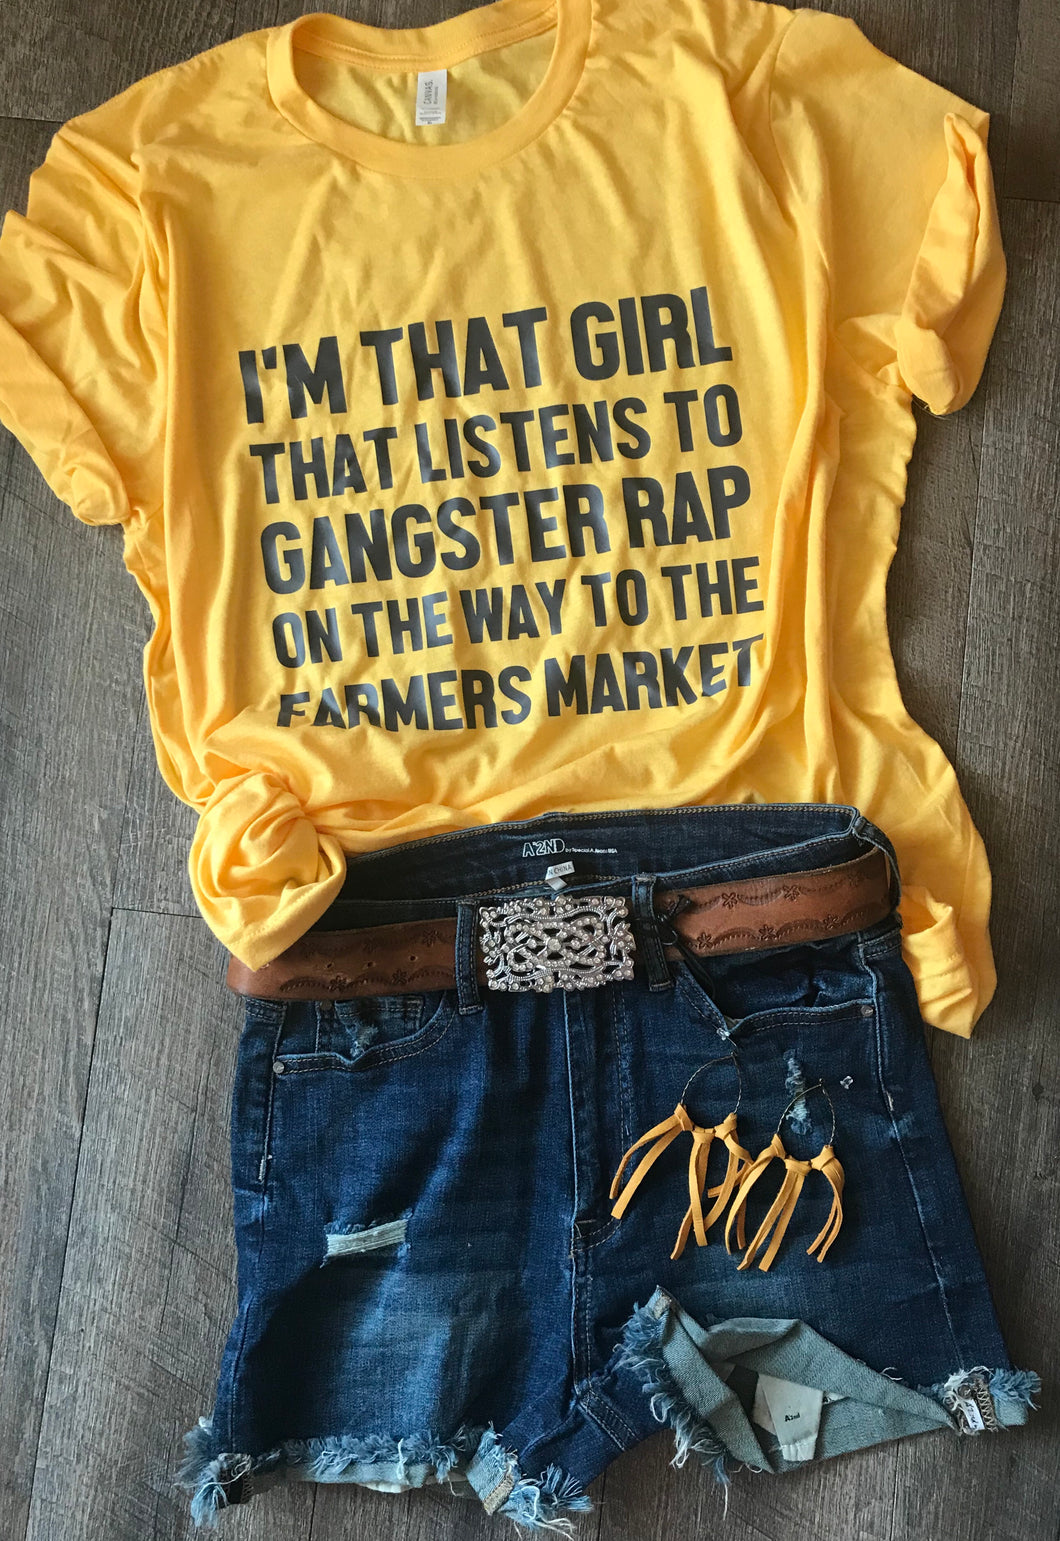 I’m that girl that listens to gangster rap on the way to the farmer’s market funny graphic tee on mustard - Mavictoria Designs Hot Press Express